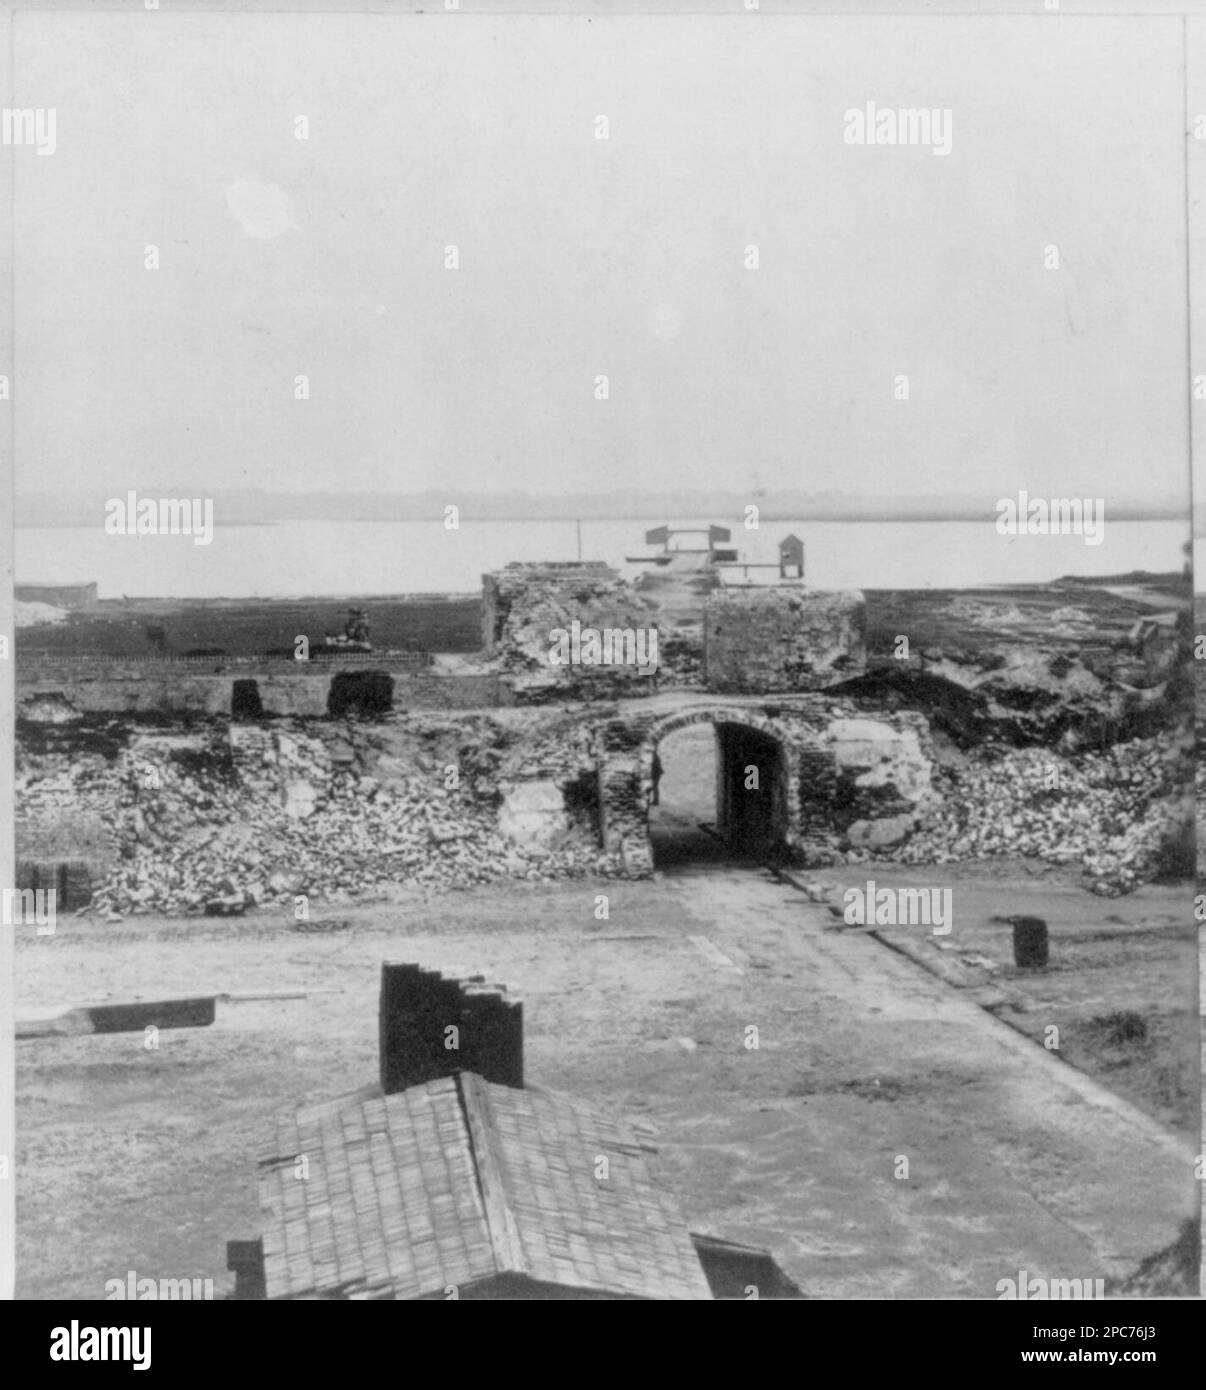 Interior of Fort Moultrie, Sullivan's Island. Civil War Photograph Collection , Original negative is: LC-B811-3066. Doors & doorways, Confederate, South Carolina, Sullivan's Island, 1860-1870, Forts & fortifications, Confederate, South Carolina, Sullivan's Island, 1860-1870, War damage, South Carolina, Sullivan's Island, 1860-1870, United States, History, Civil War, 1861-1865, Destruction & pillage, Union, South Carolina, Sullivan's Island, United States, History, Civil War, 1861-1865, Military facilities, Confederate, South Carolina, Sullivan's Island. Stock Photo